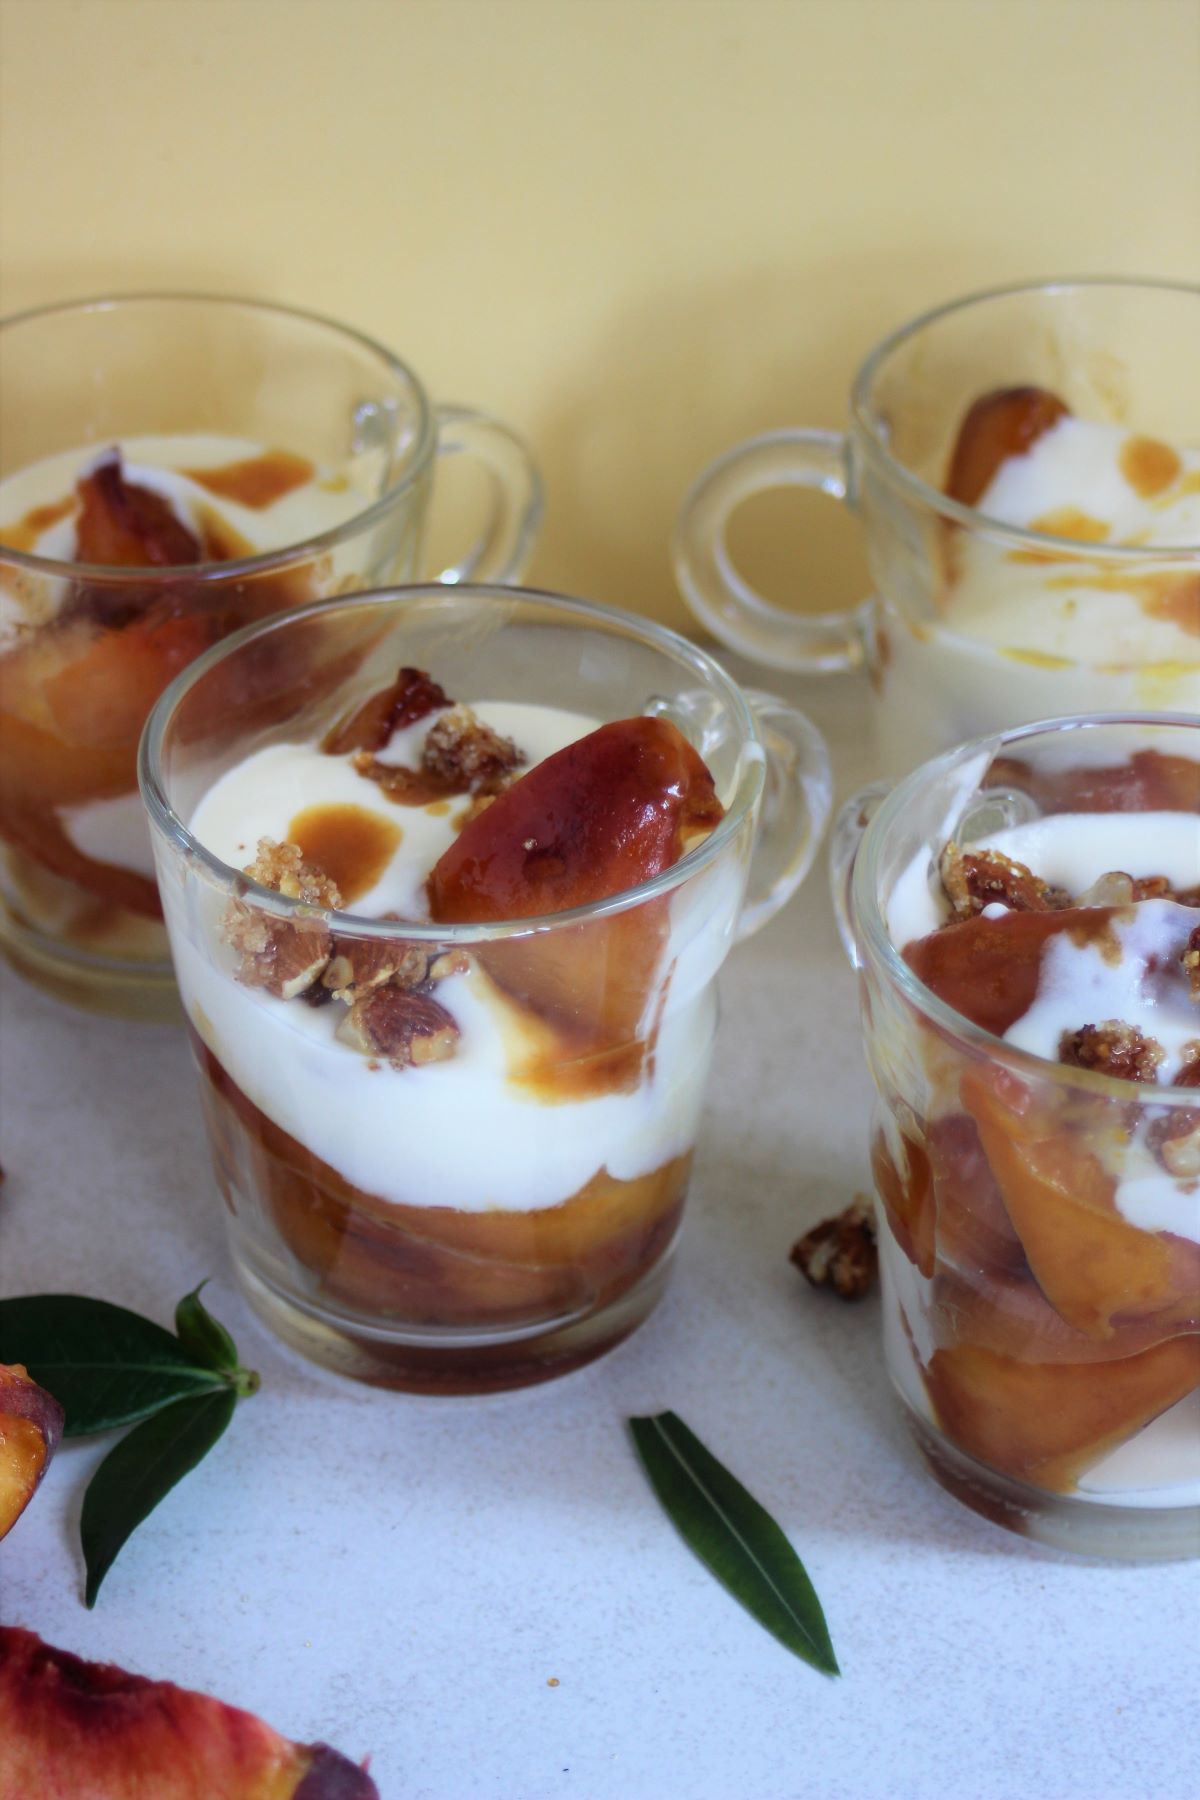 Glass cups with cream, peaches, and caramelized almonds.